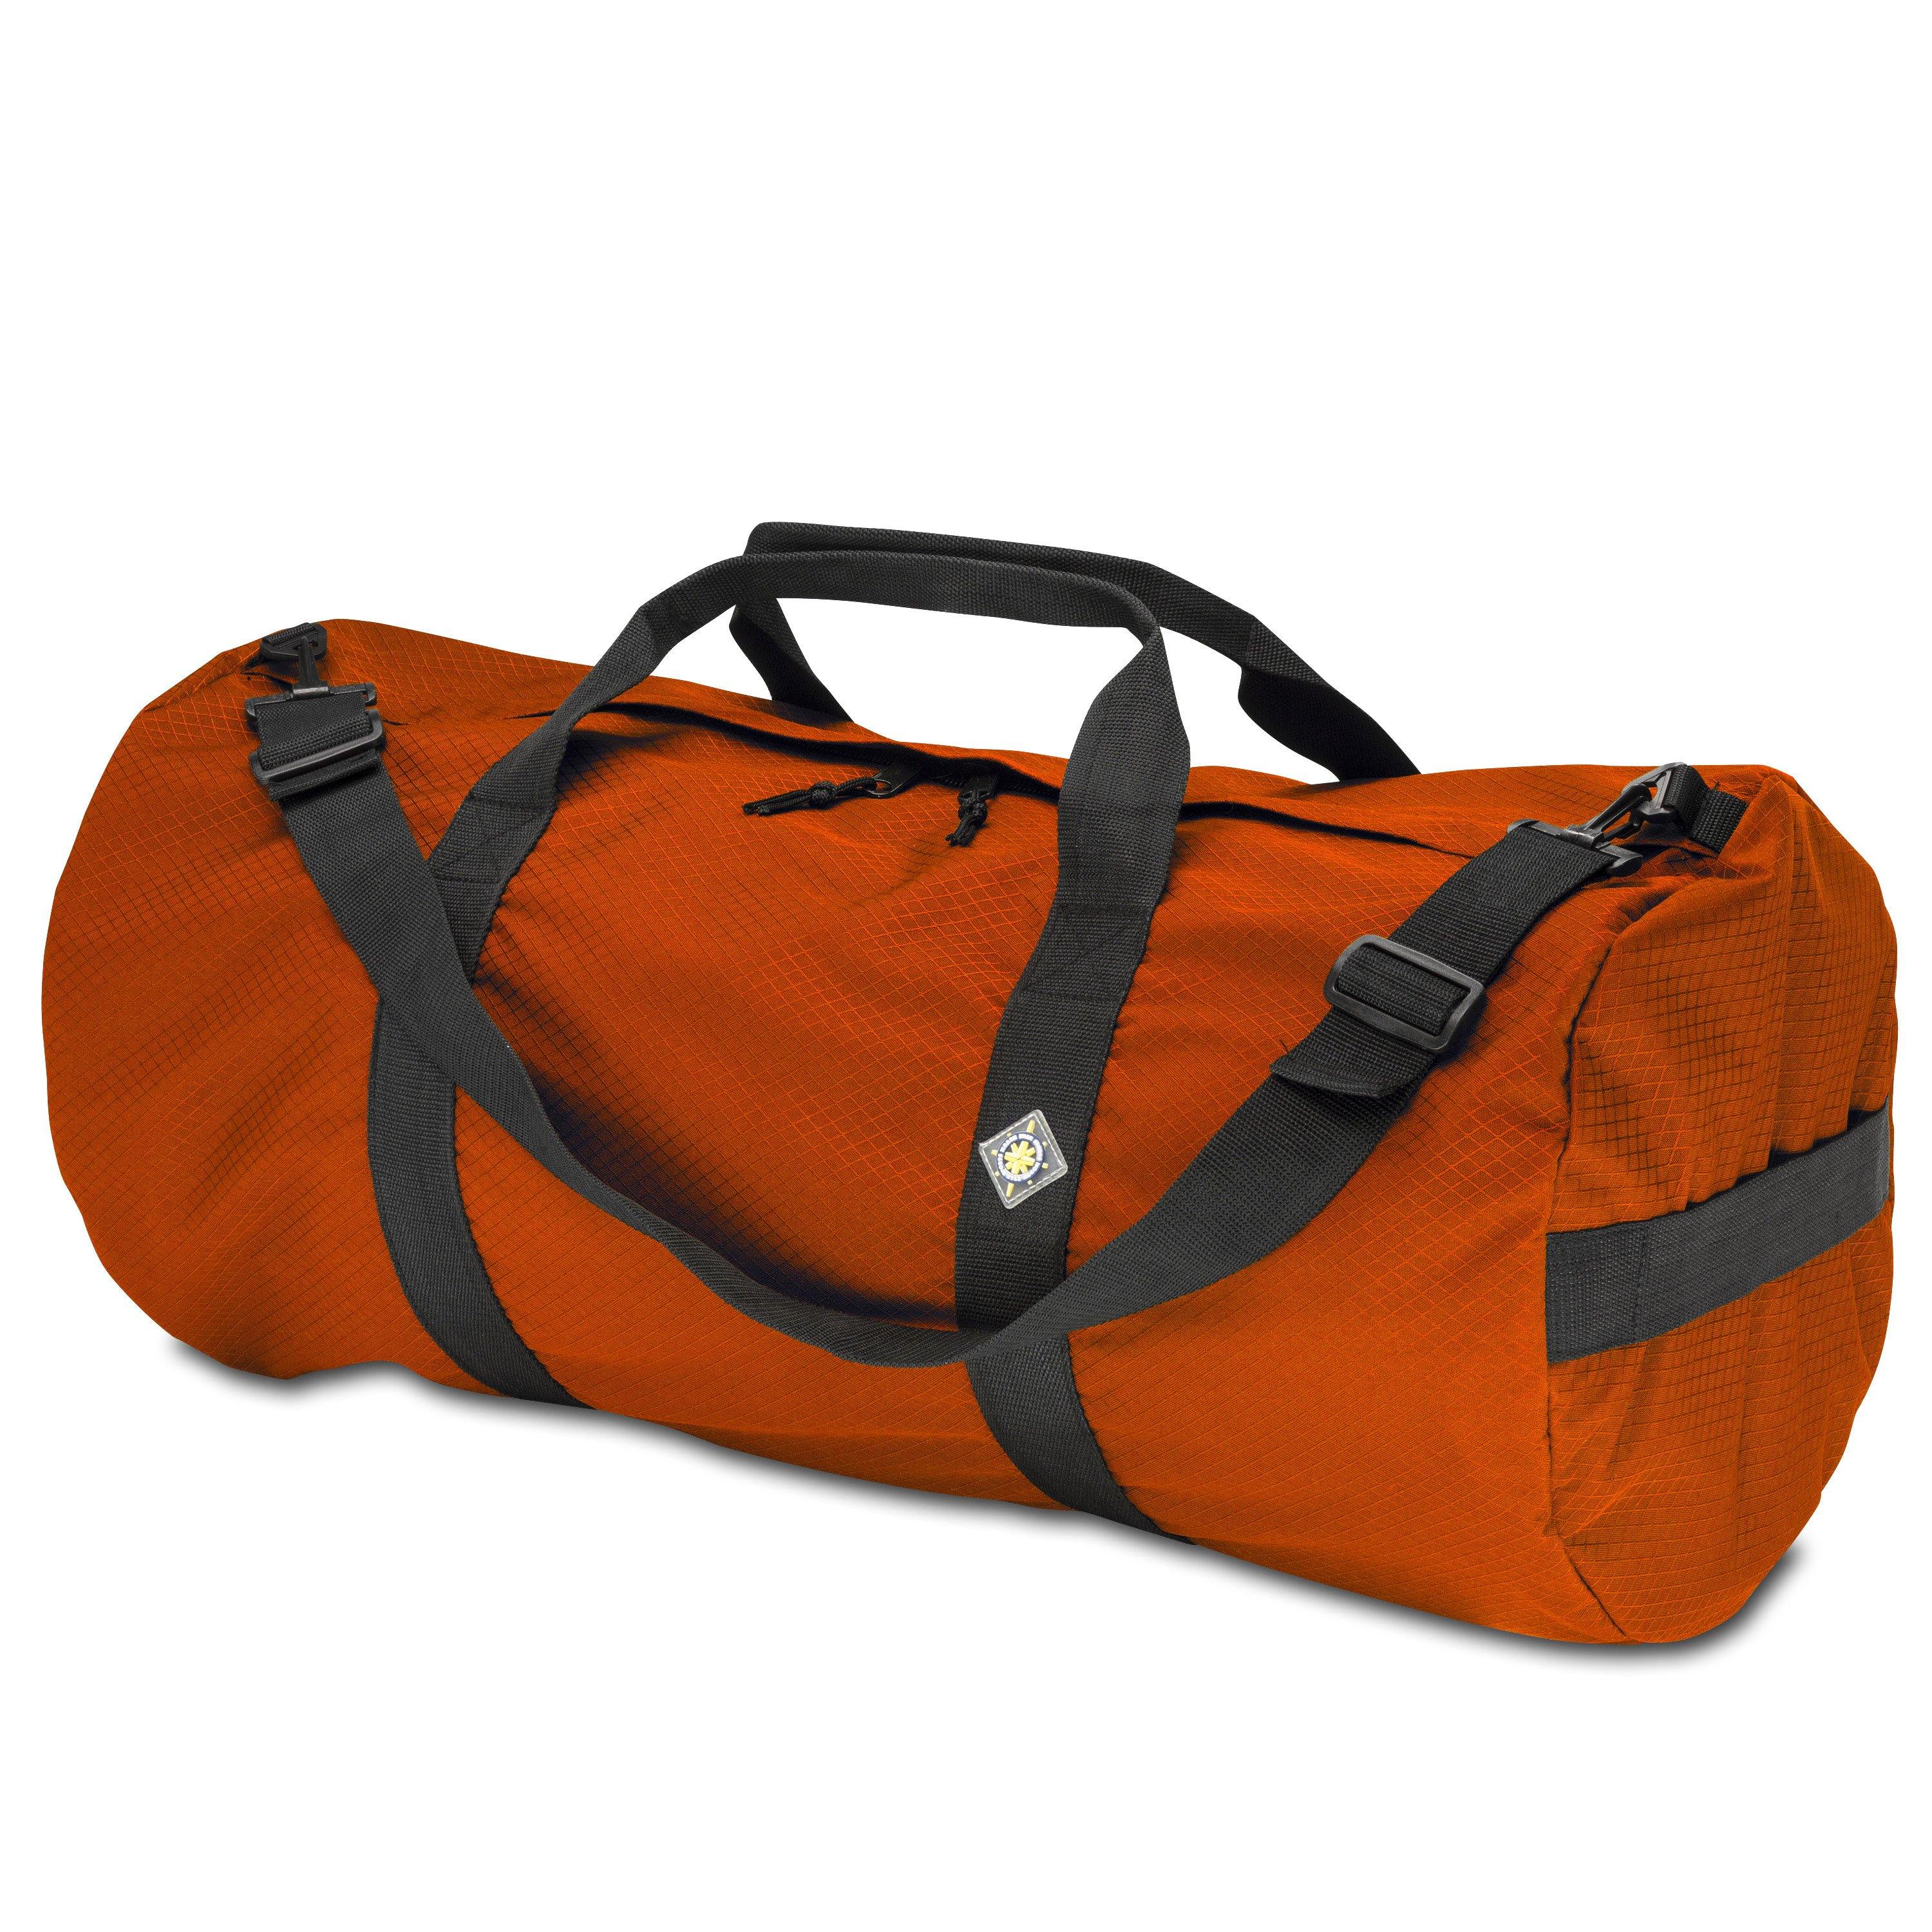 Studio photo the International Orange SD1430DLX Standard Duffle by Northstar Bags. 75 liter duffel with diamond ripstop fabric, thick webbing straps, and a large format metal zipper. Guaranteed for life.